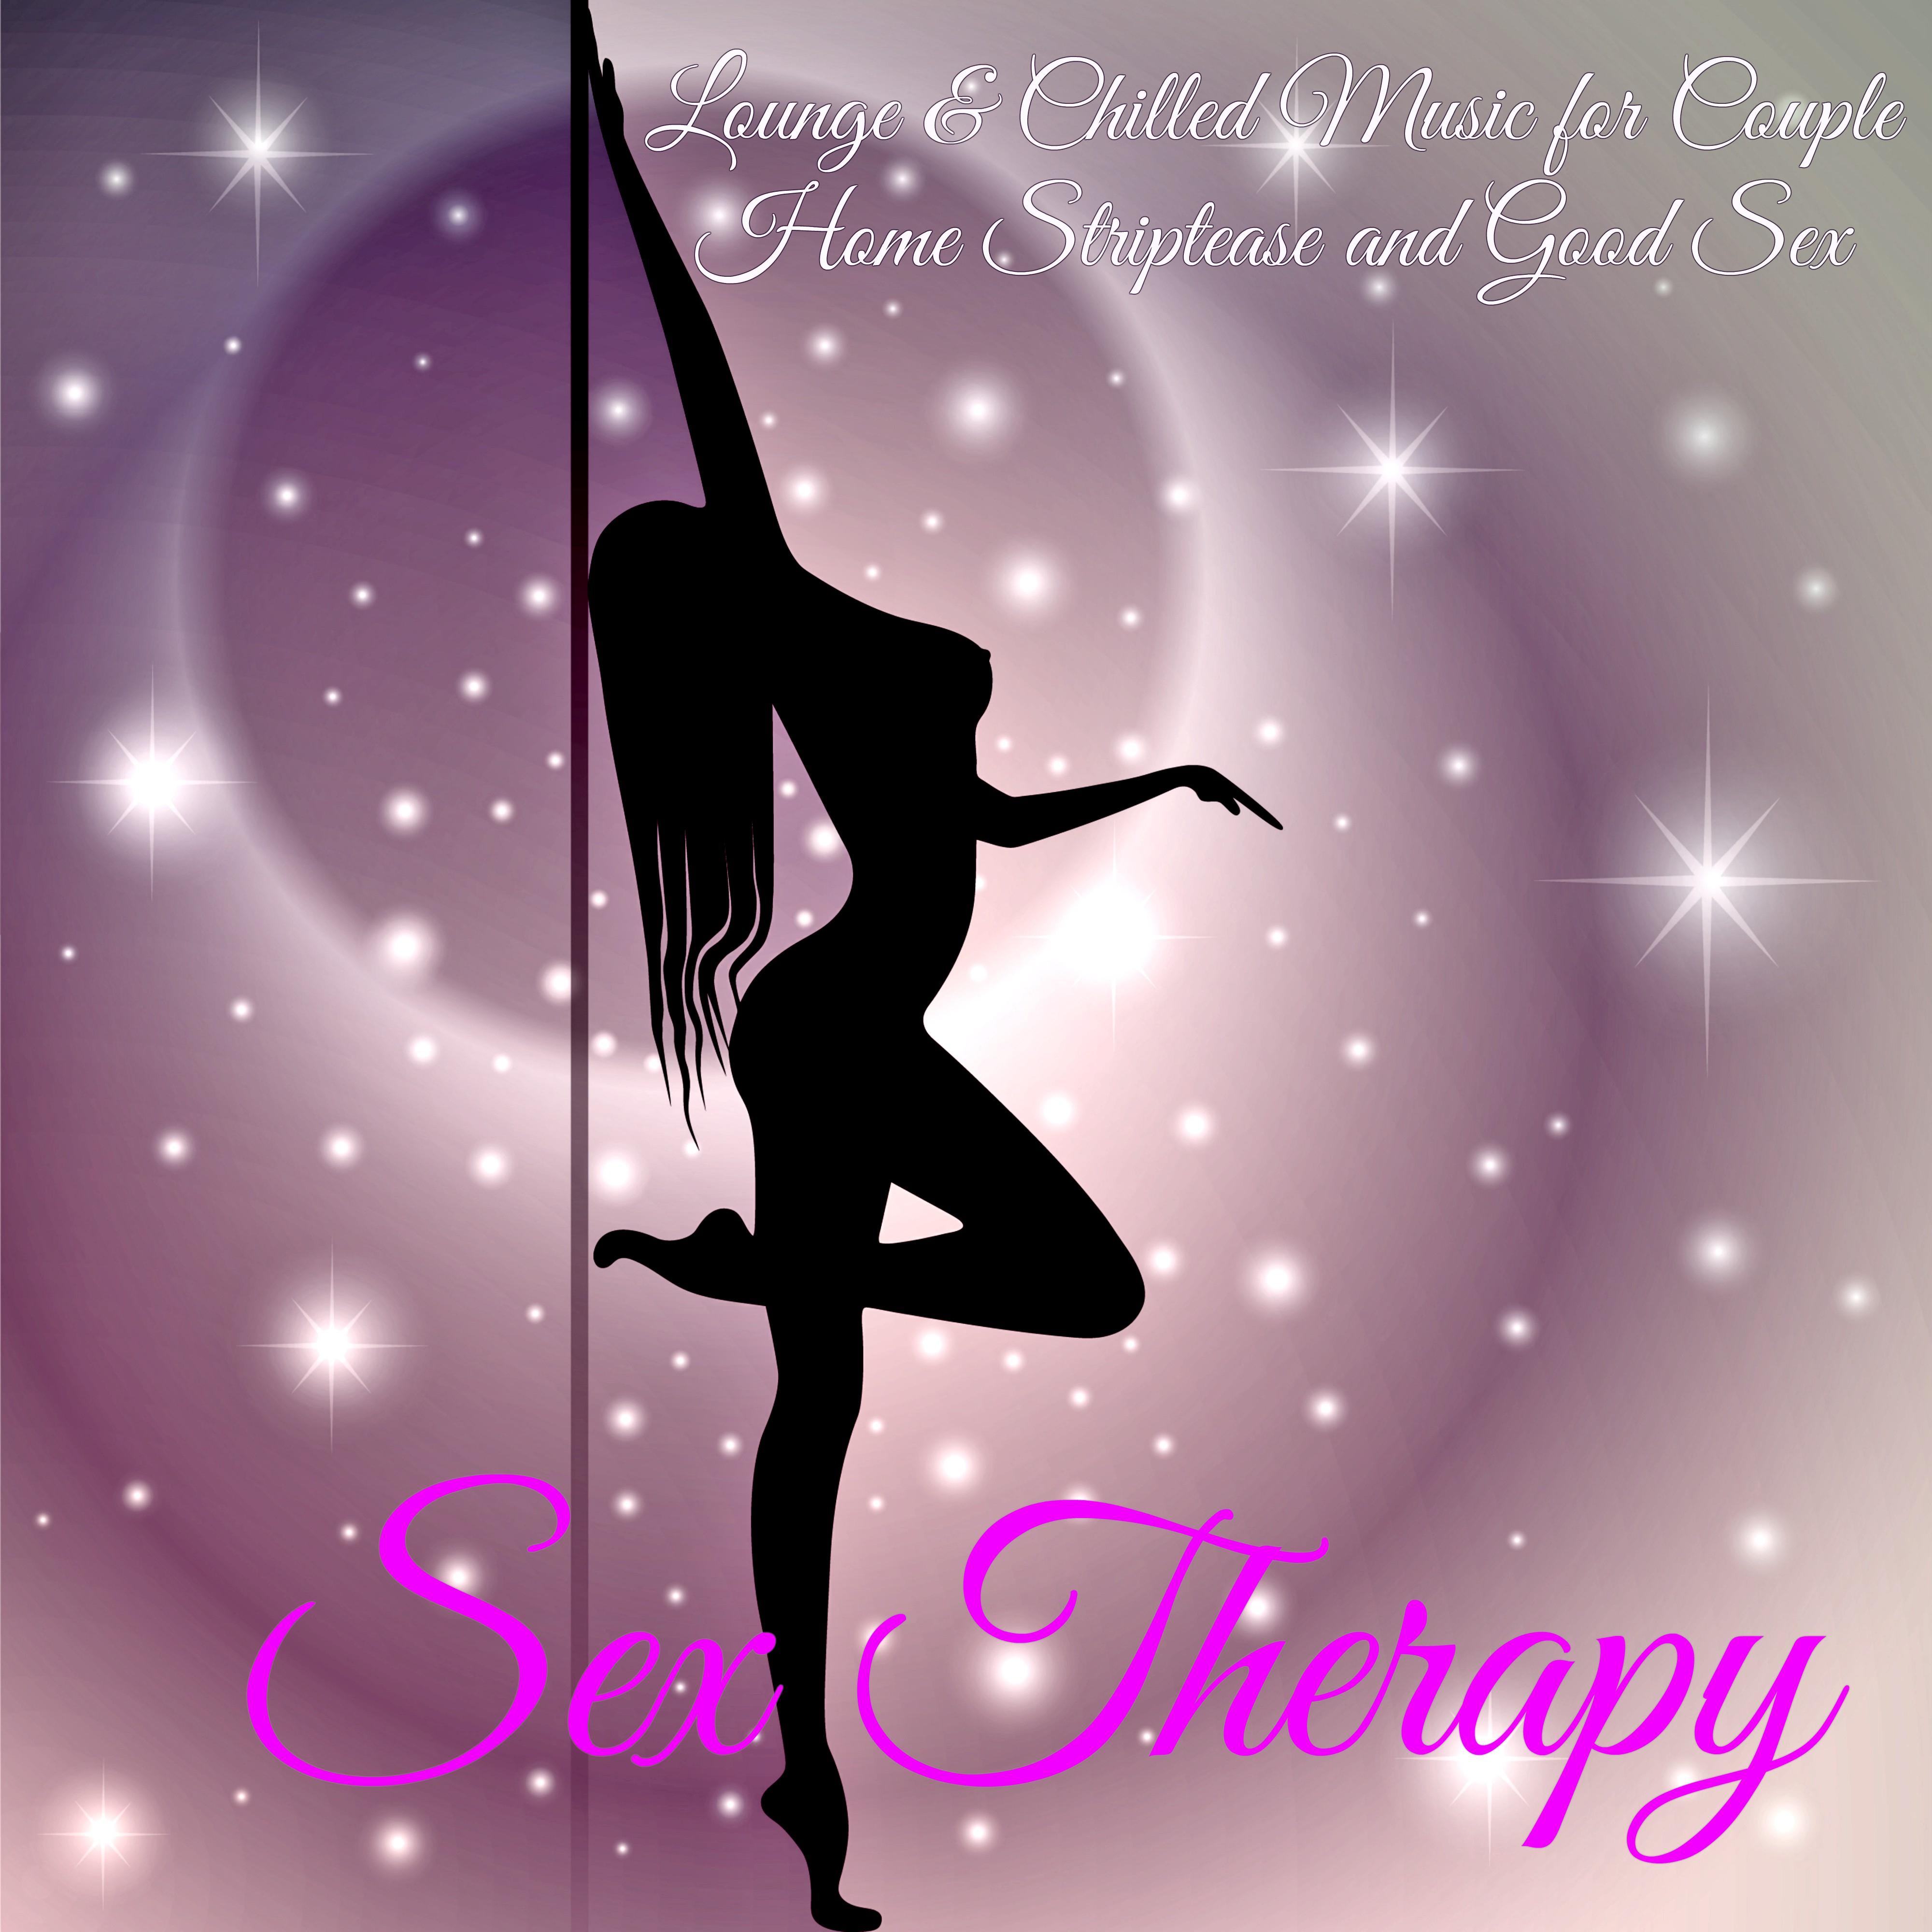 *** Therapy – Lounge & Chilled Music for Couple Home Striptease and Good ***